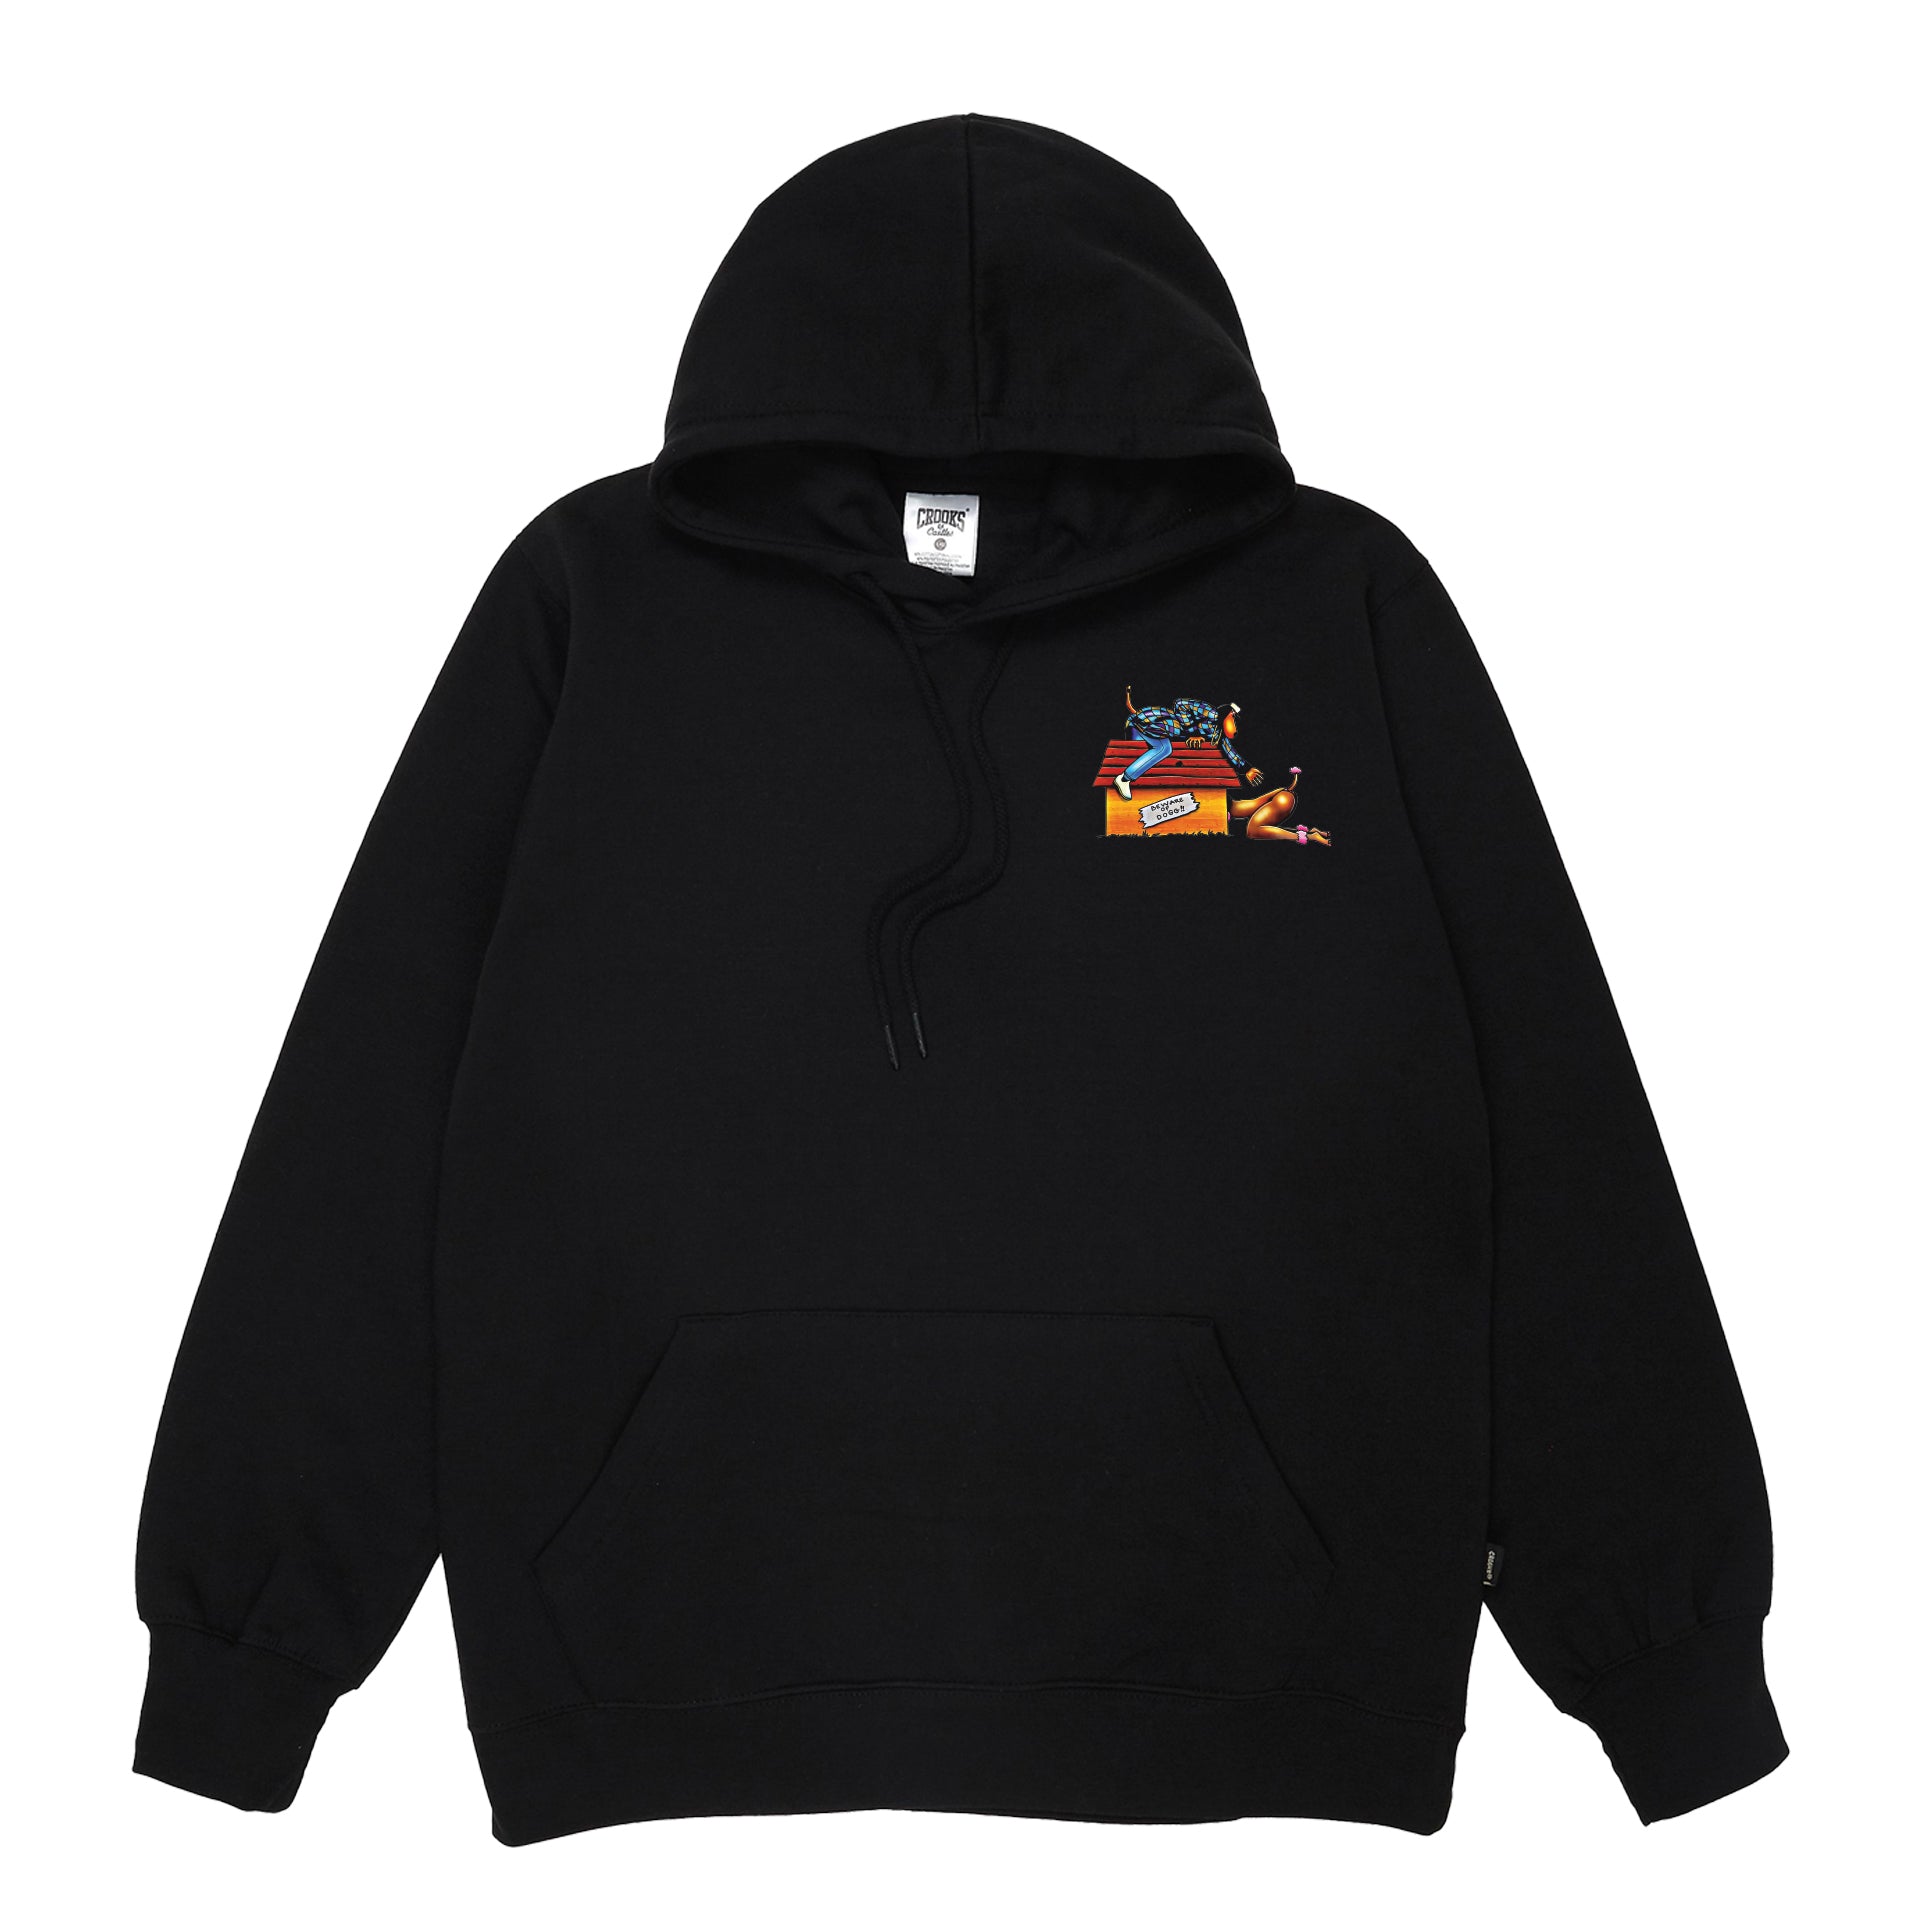 Doggystyle 1993 Hoodie